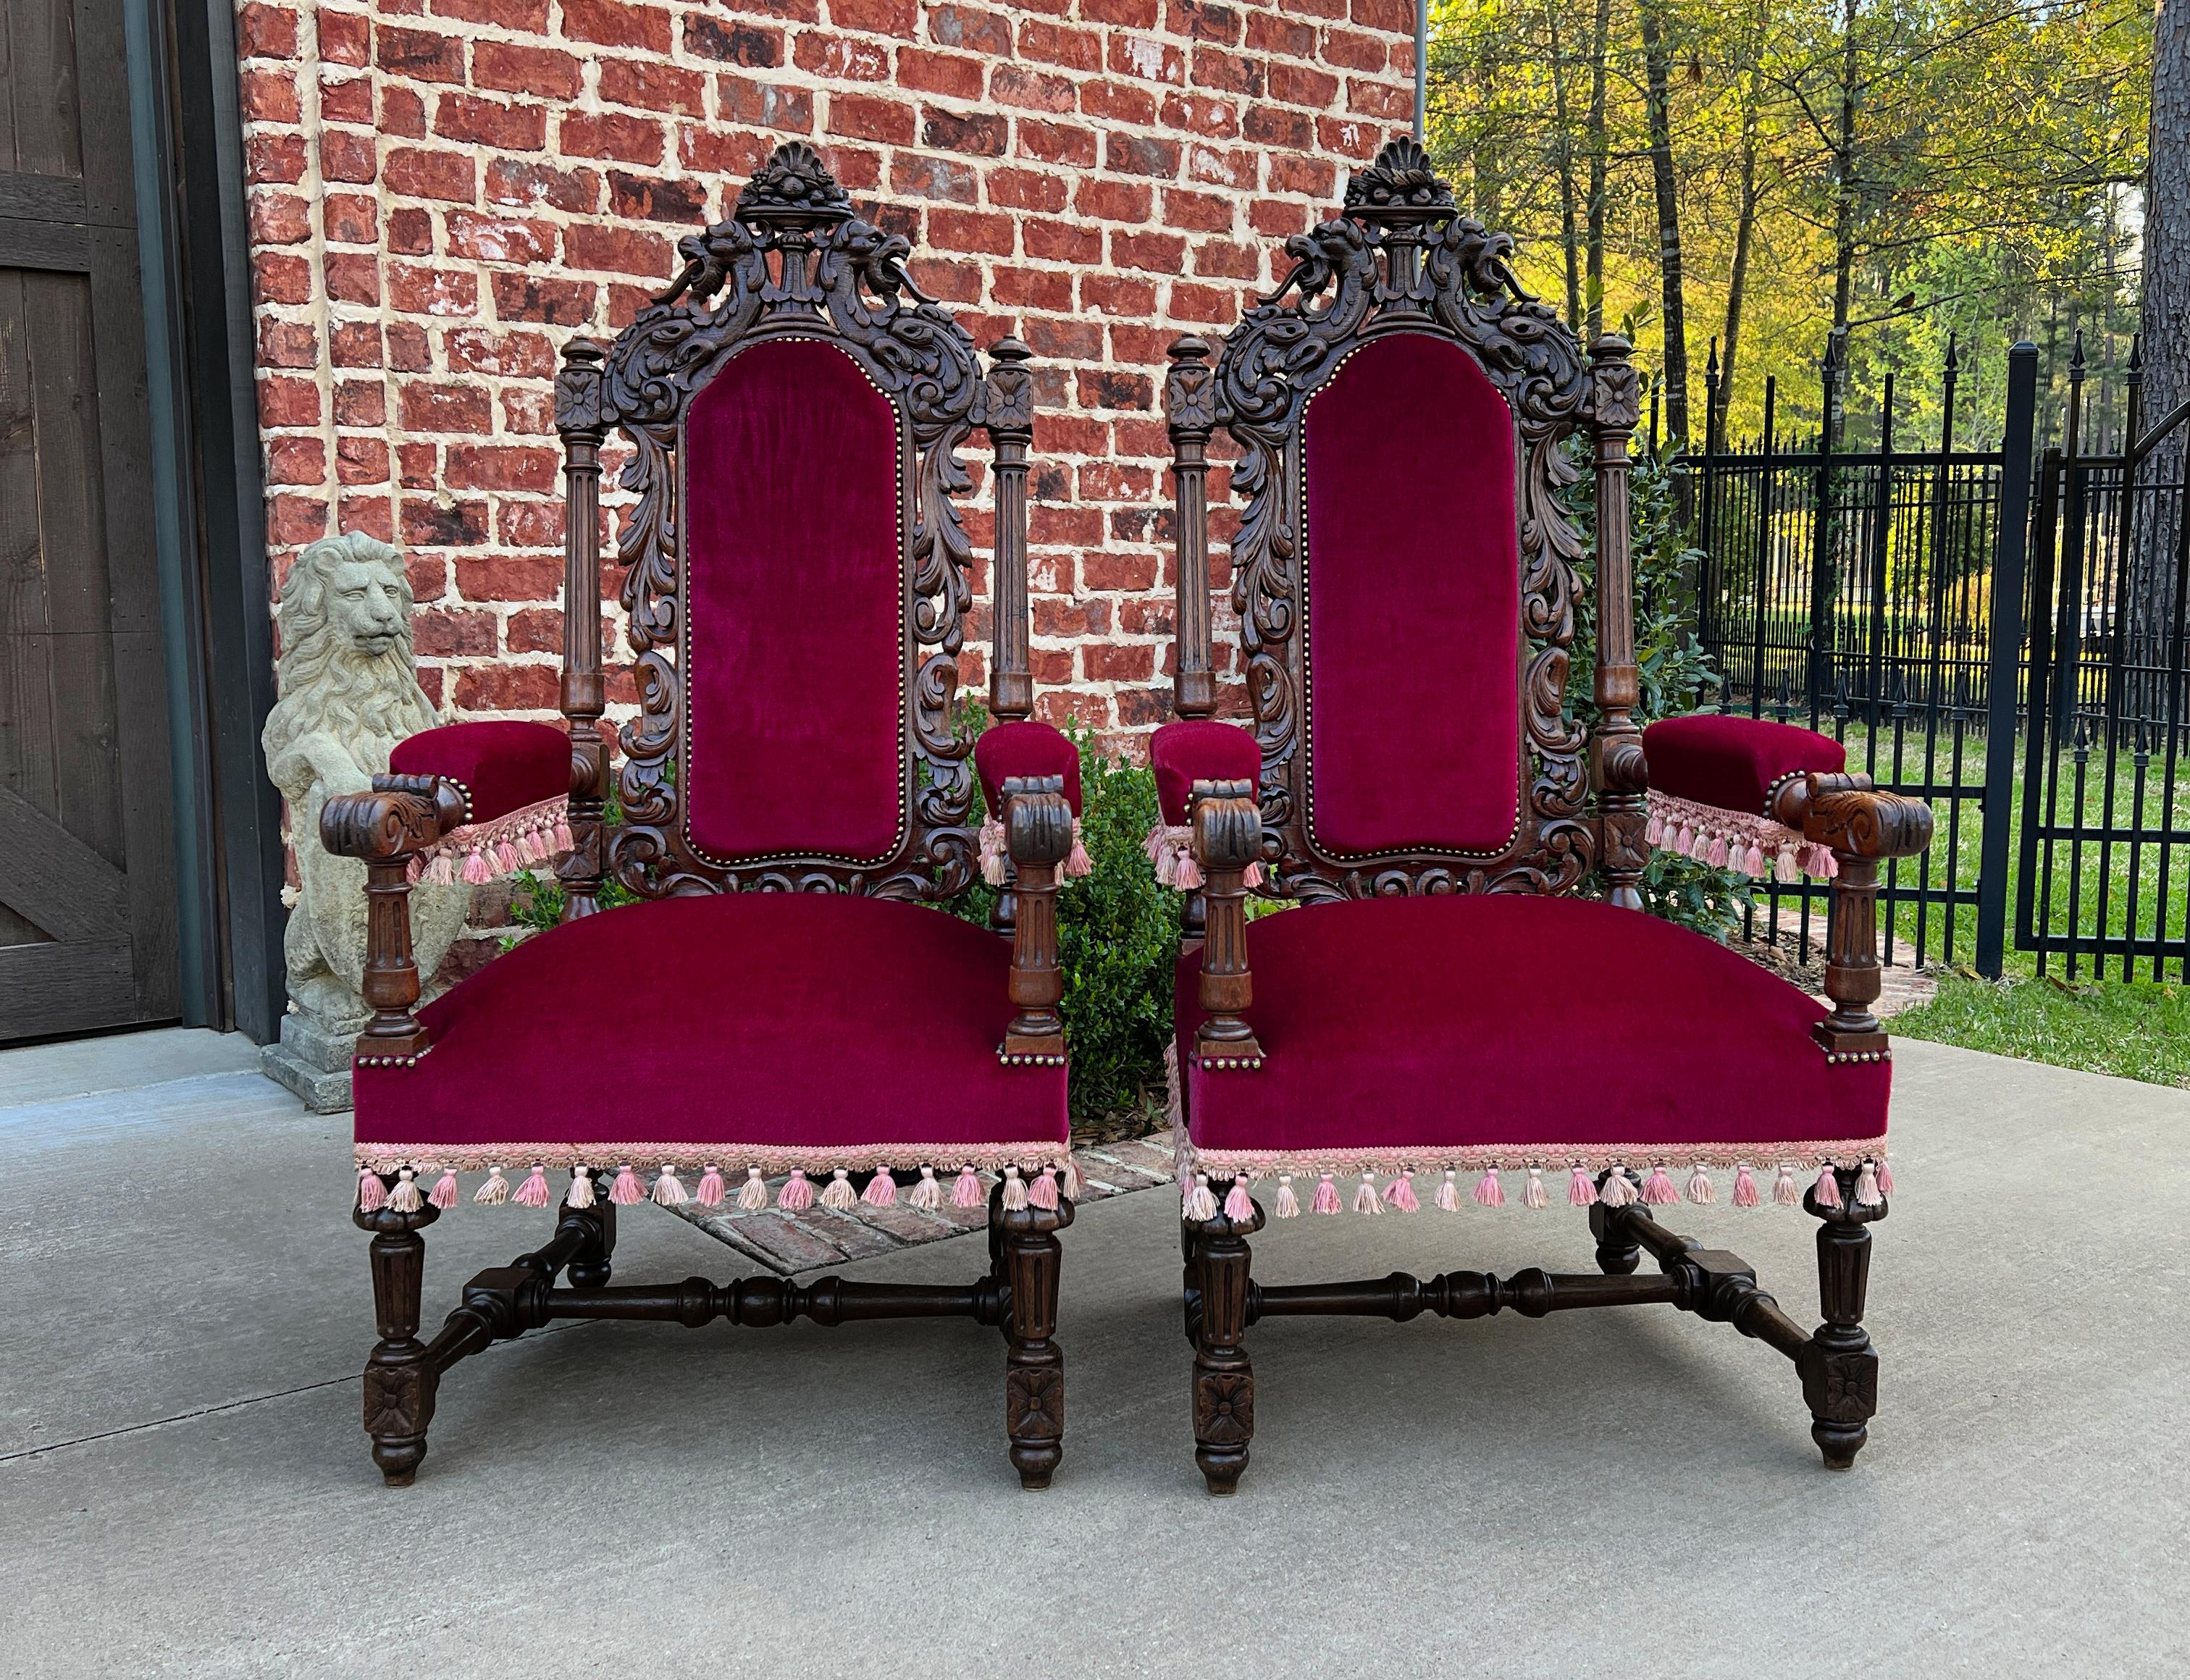 Antique French Pair Arm Chairs Fireside Throne Chairs Large Red Upholstery 19thc For Sale 1